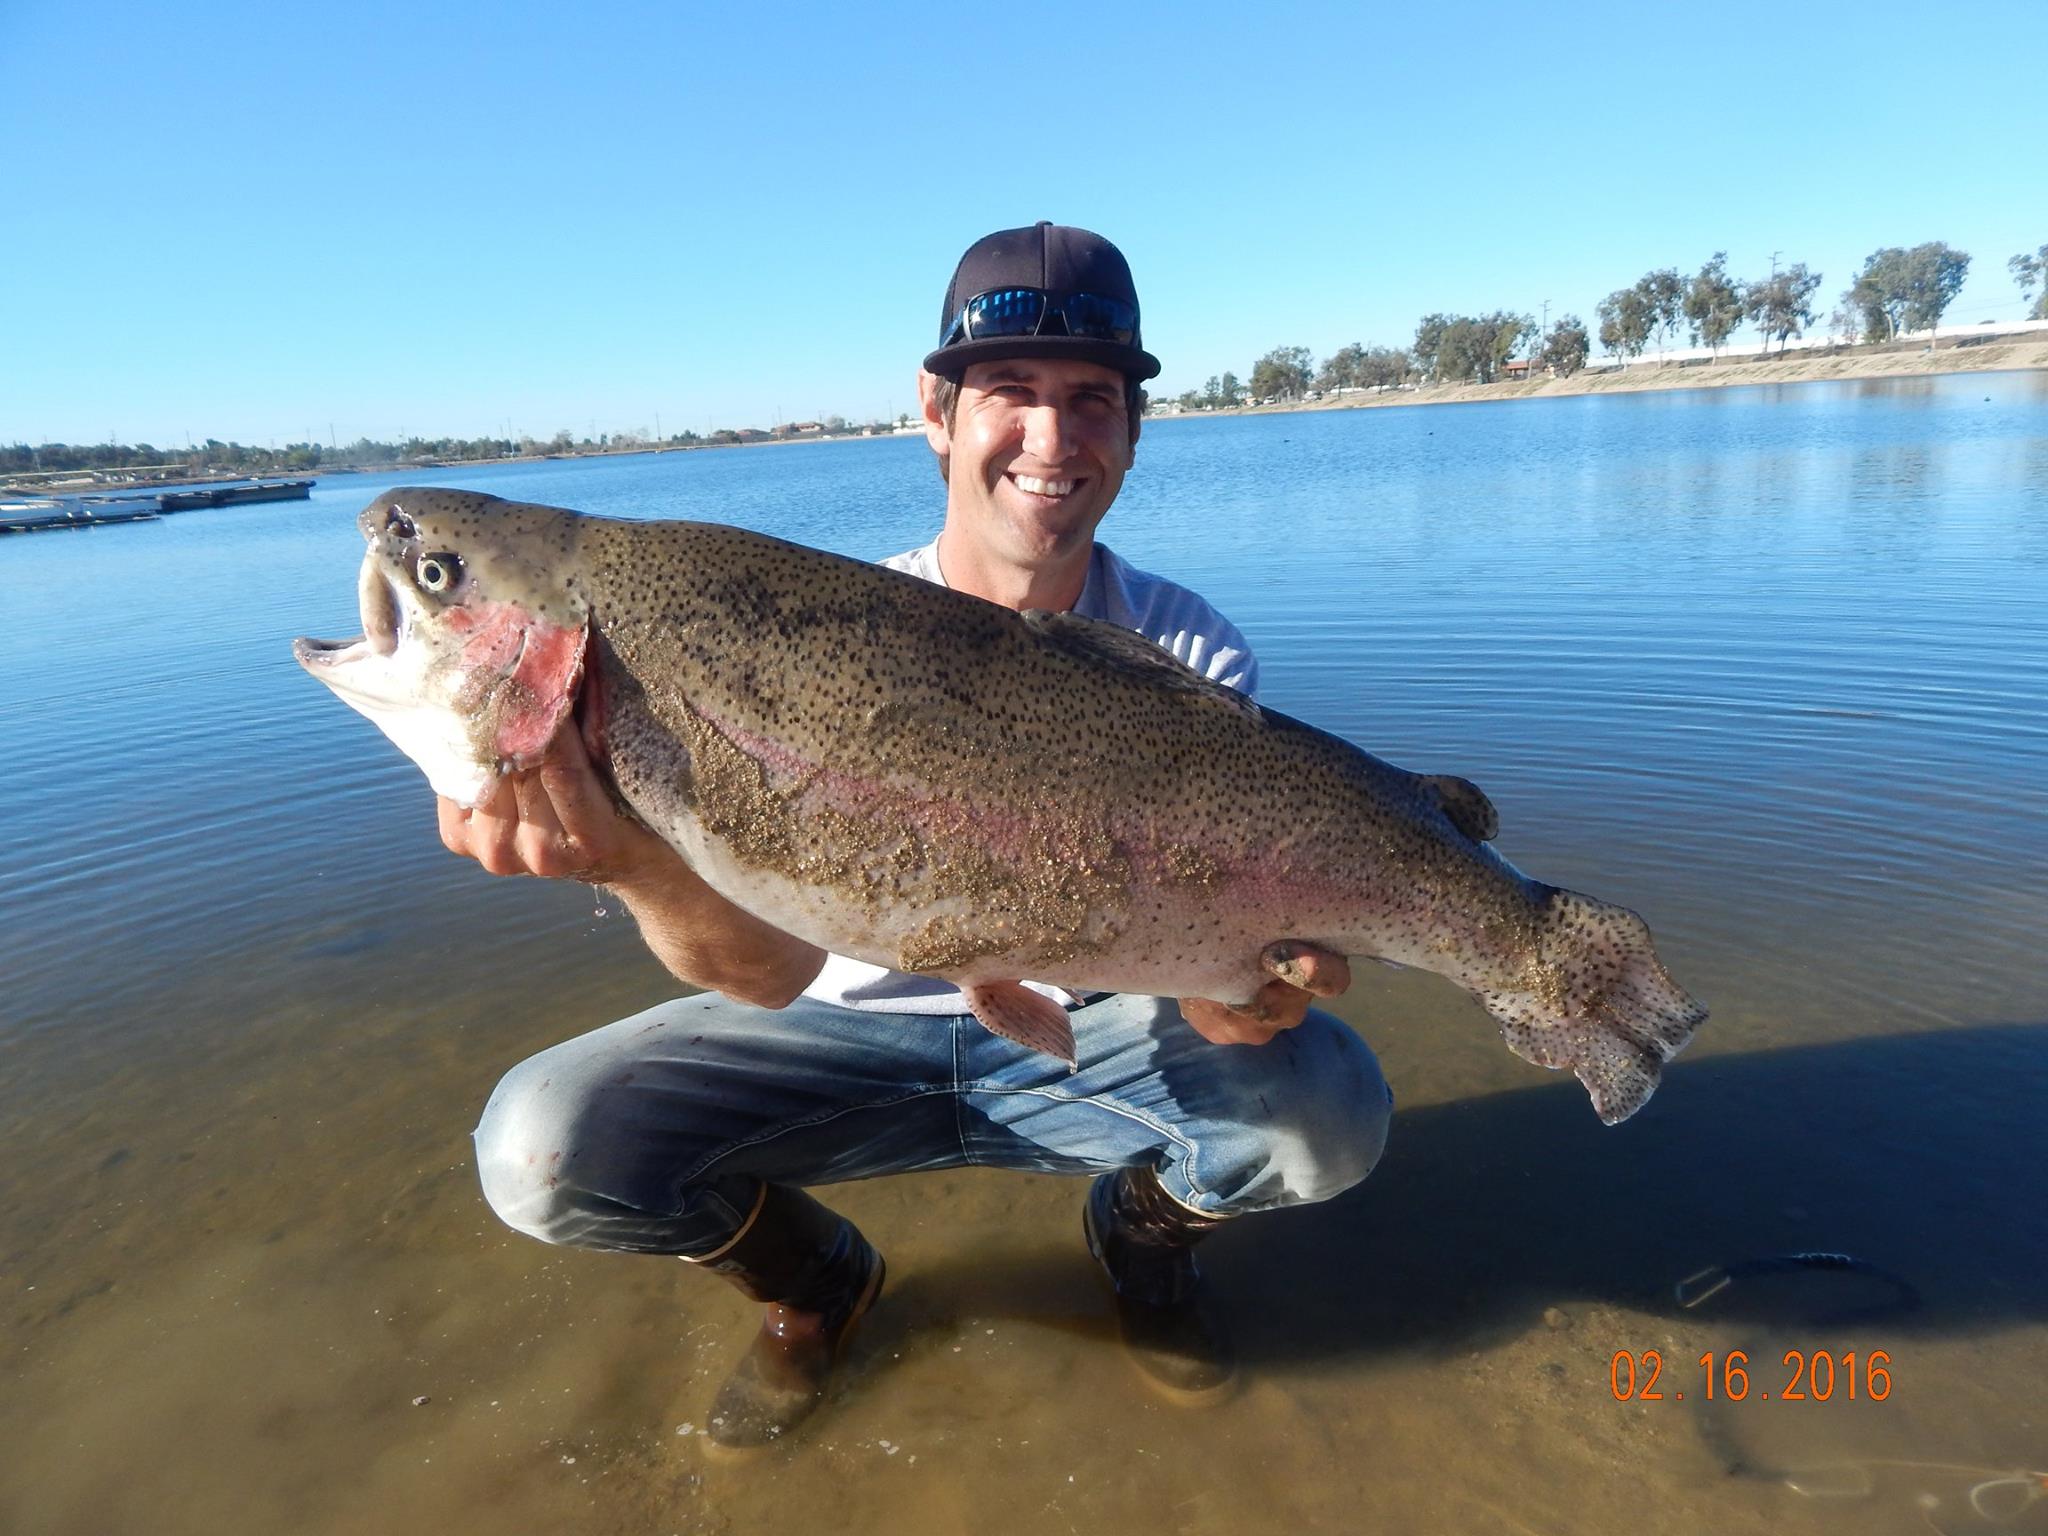 Patrick Sullivan of Tustin is back again – this time with a 15 pound 3 ounce trout